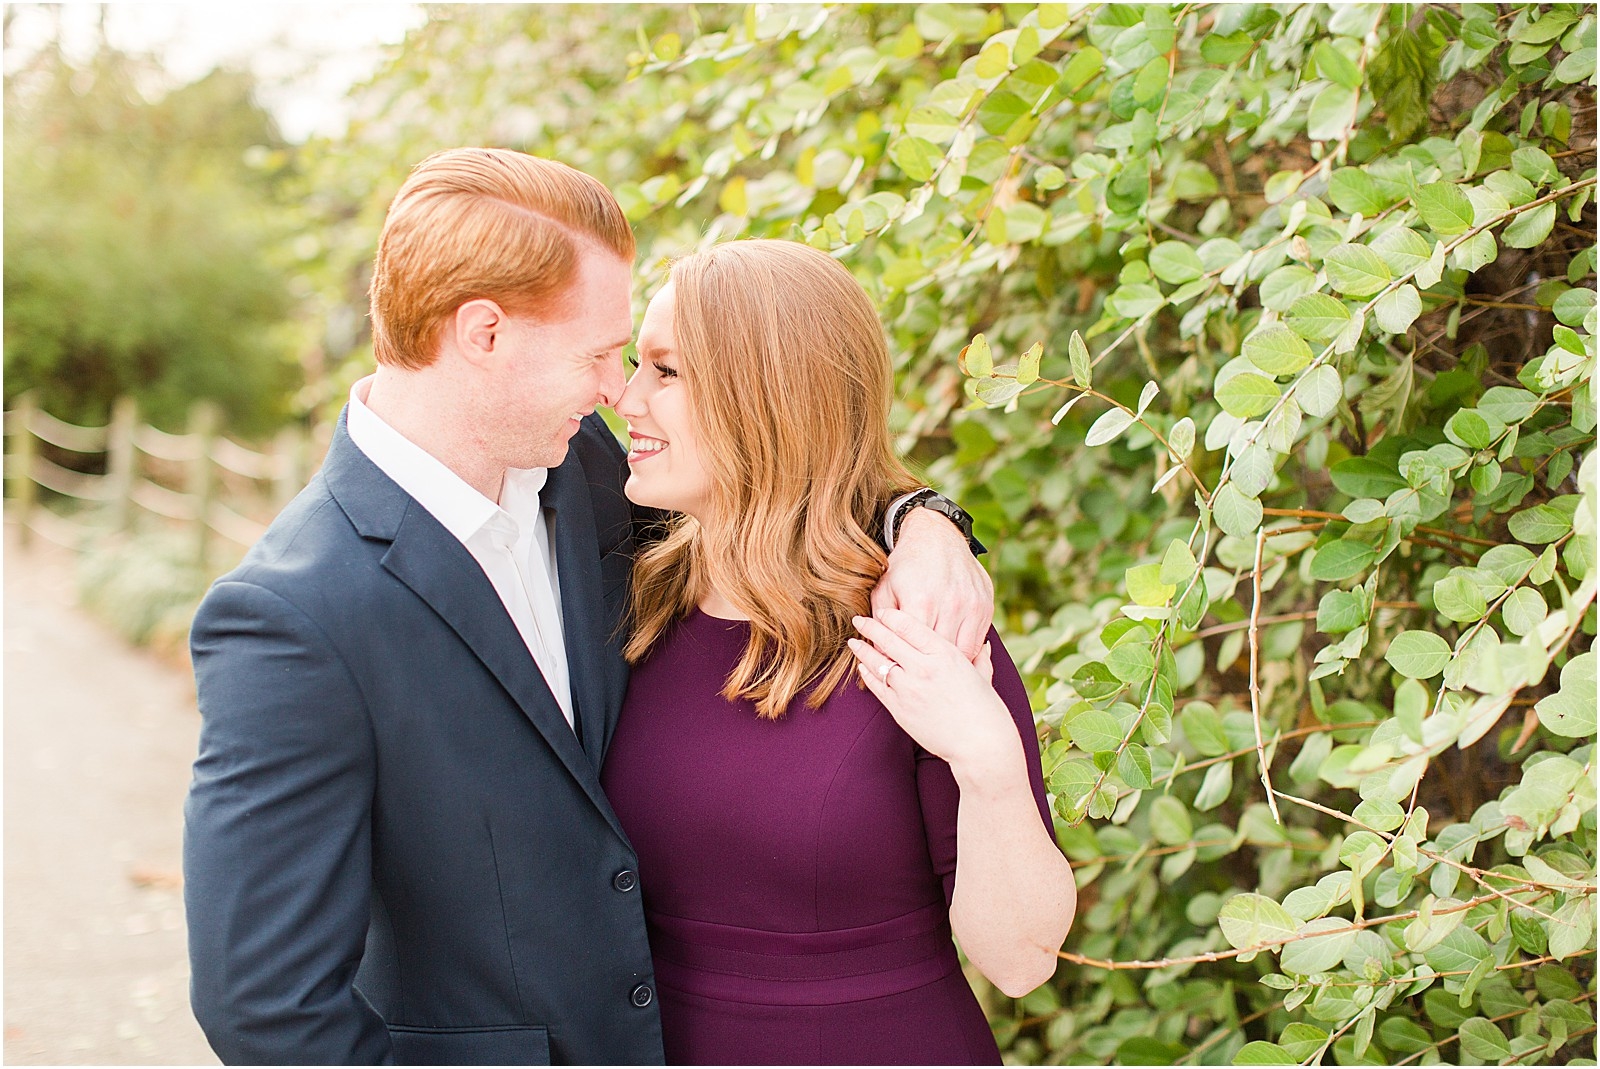 A Mesker Park Zoo Engagement Session | Jennah and Steve | Bret and Brandie Photography014.jpg